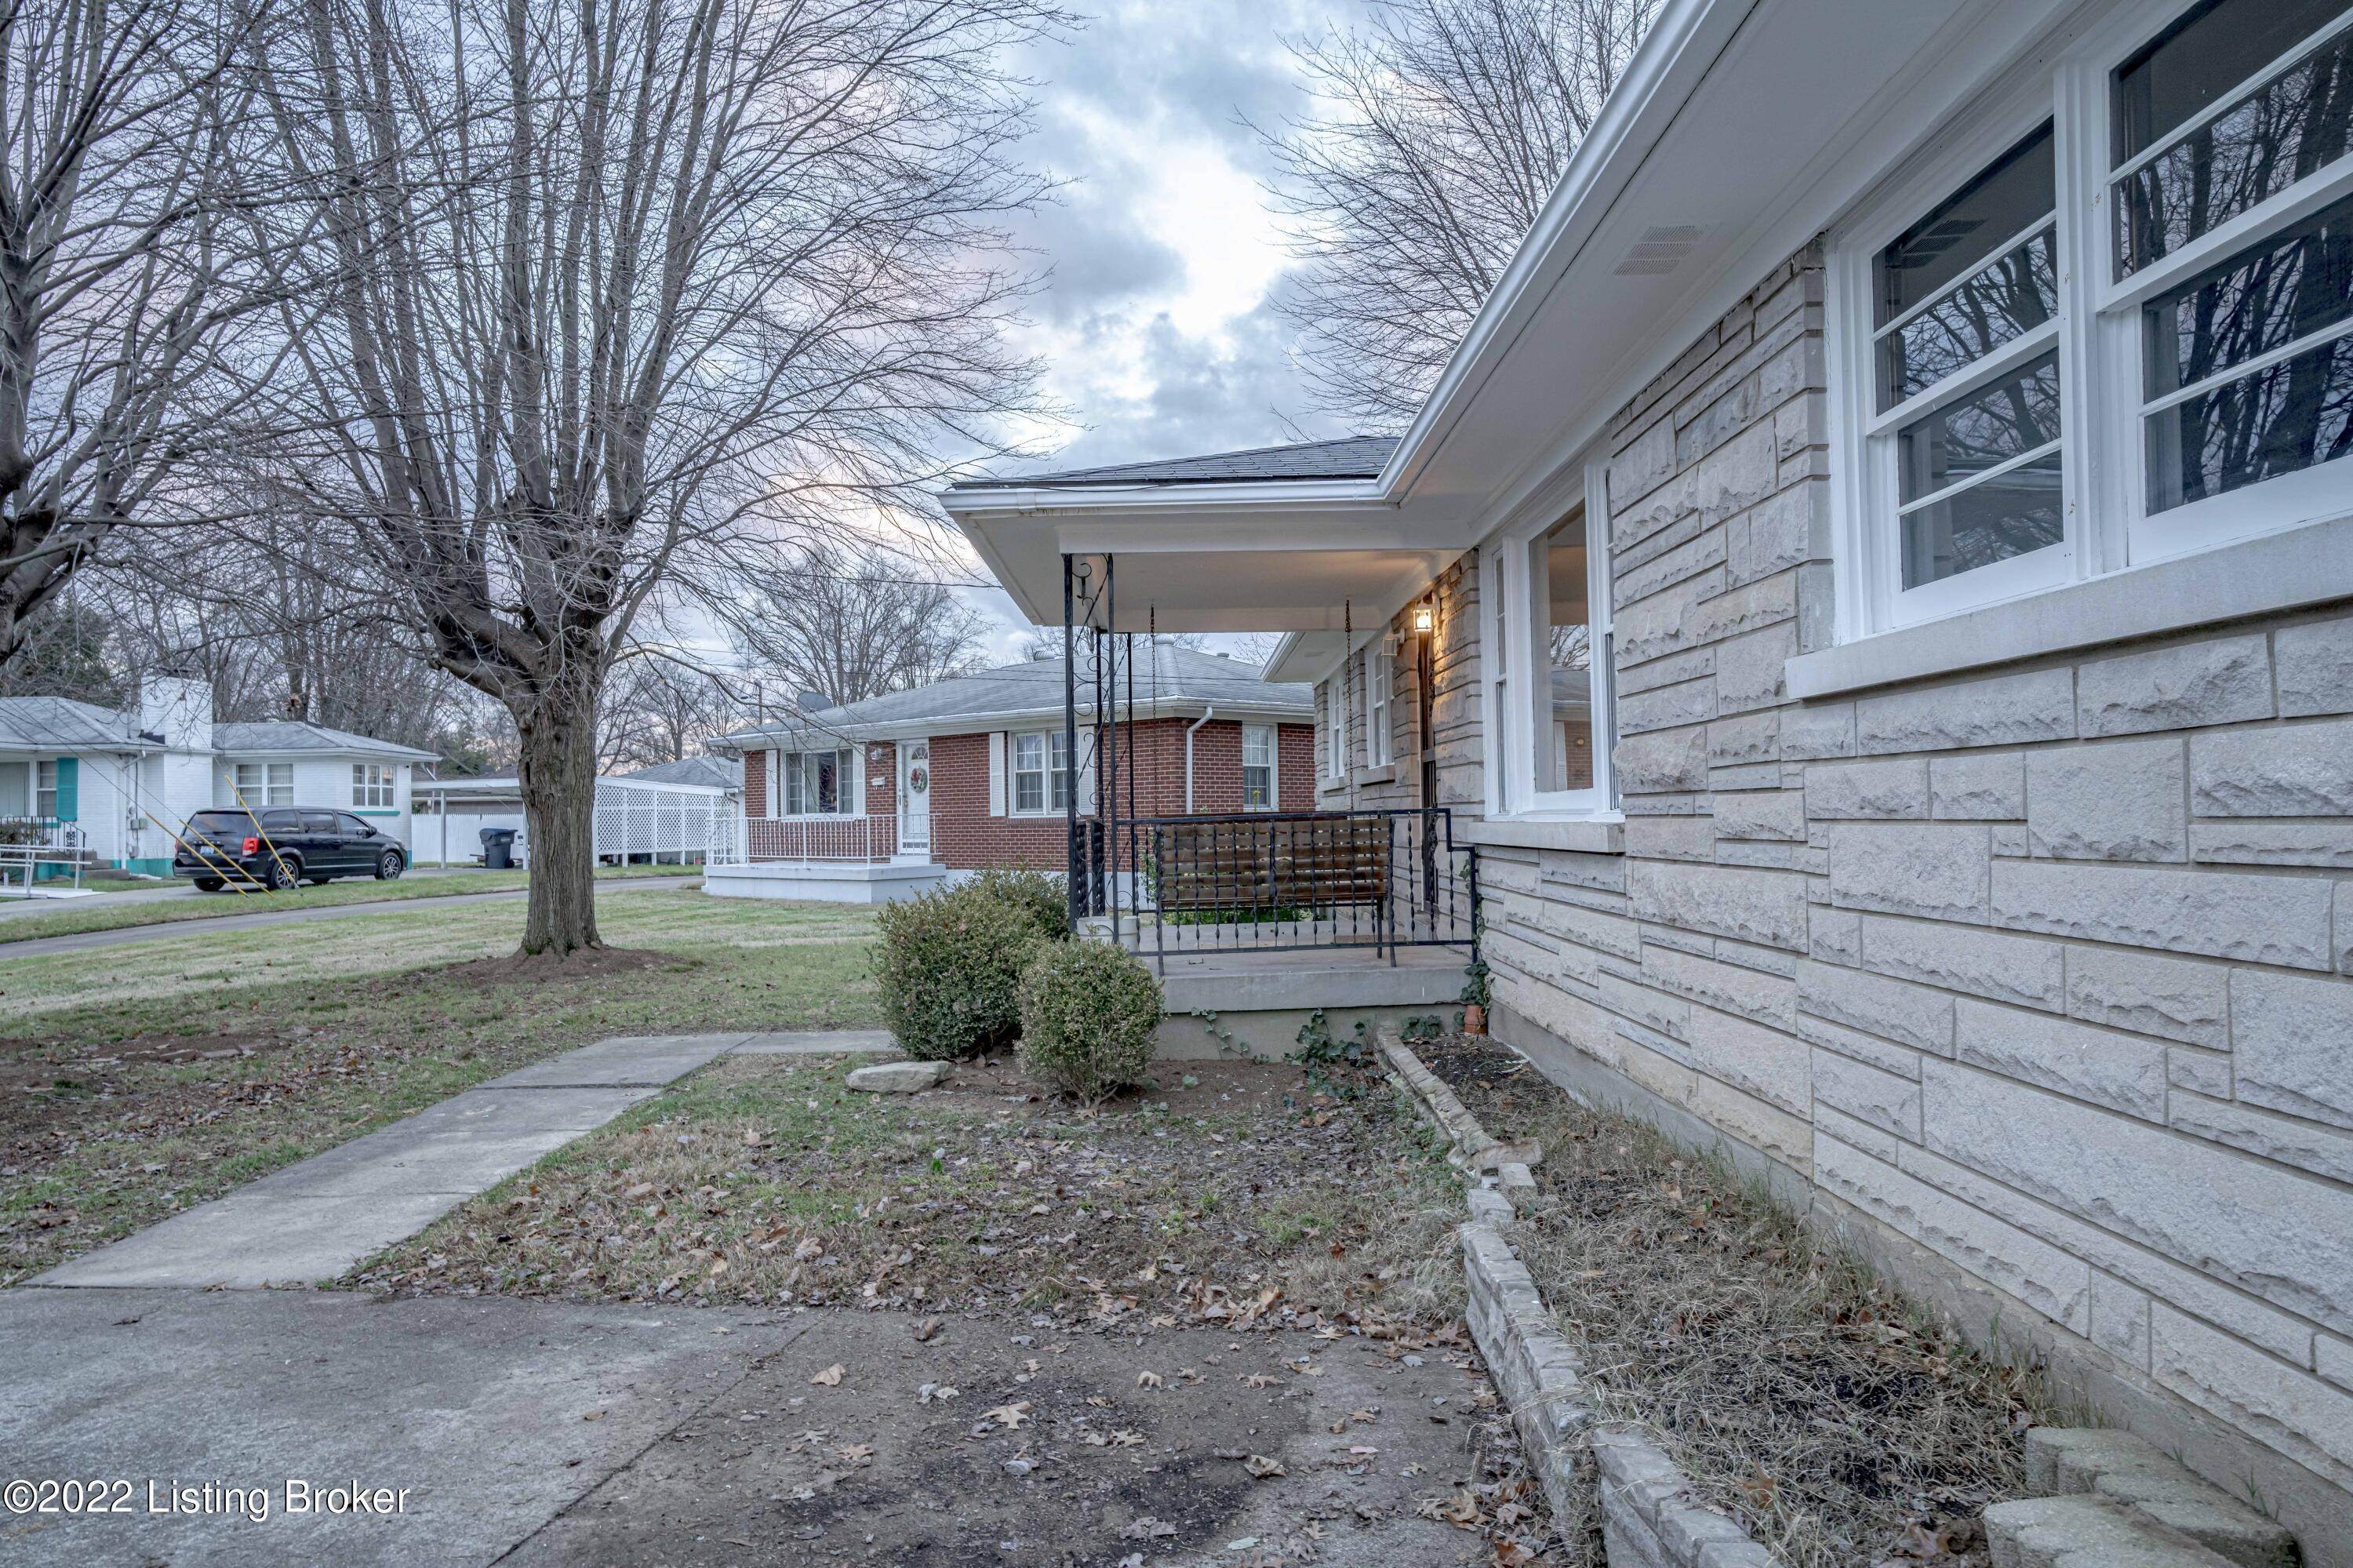 49. Single Family at Louisville, KY 40216